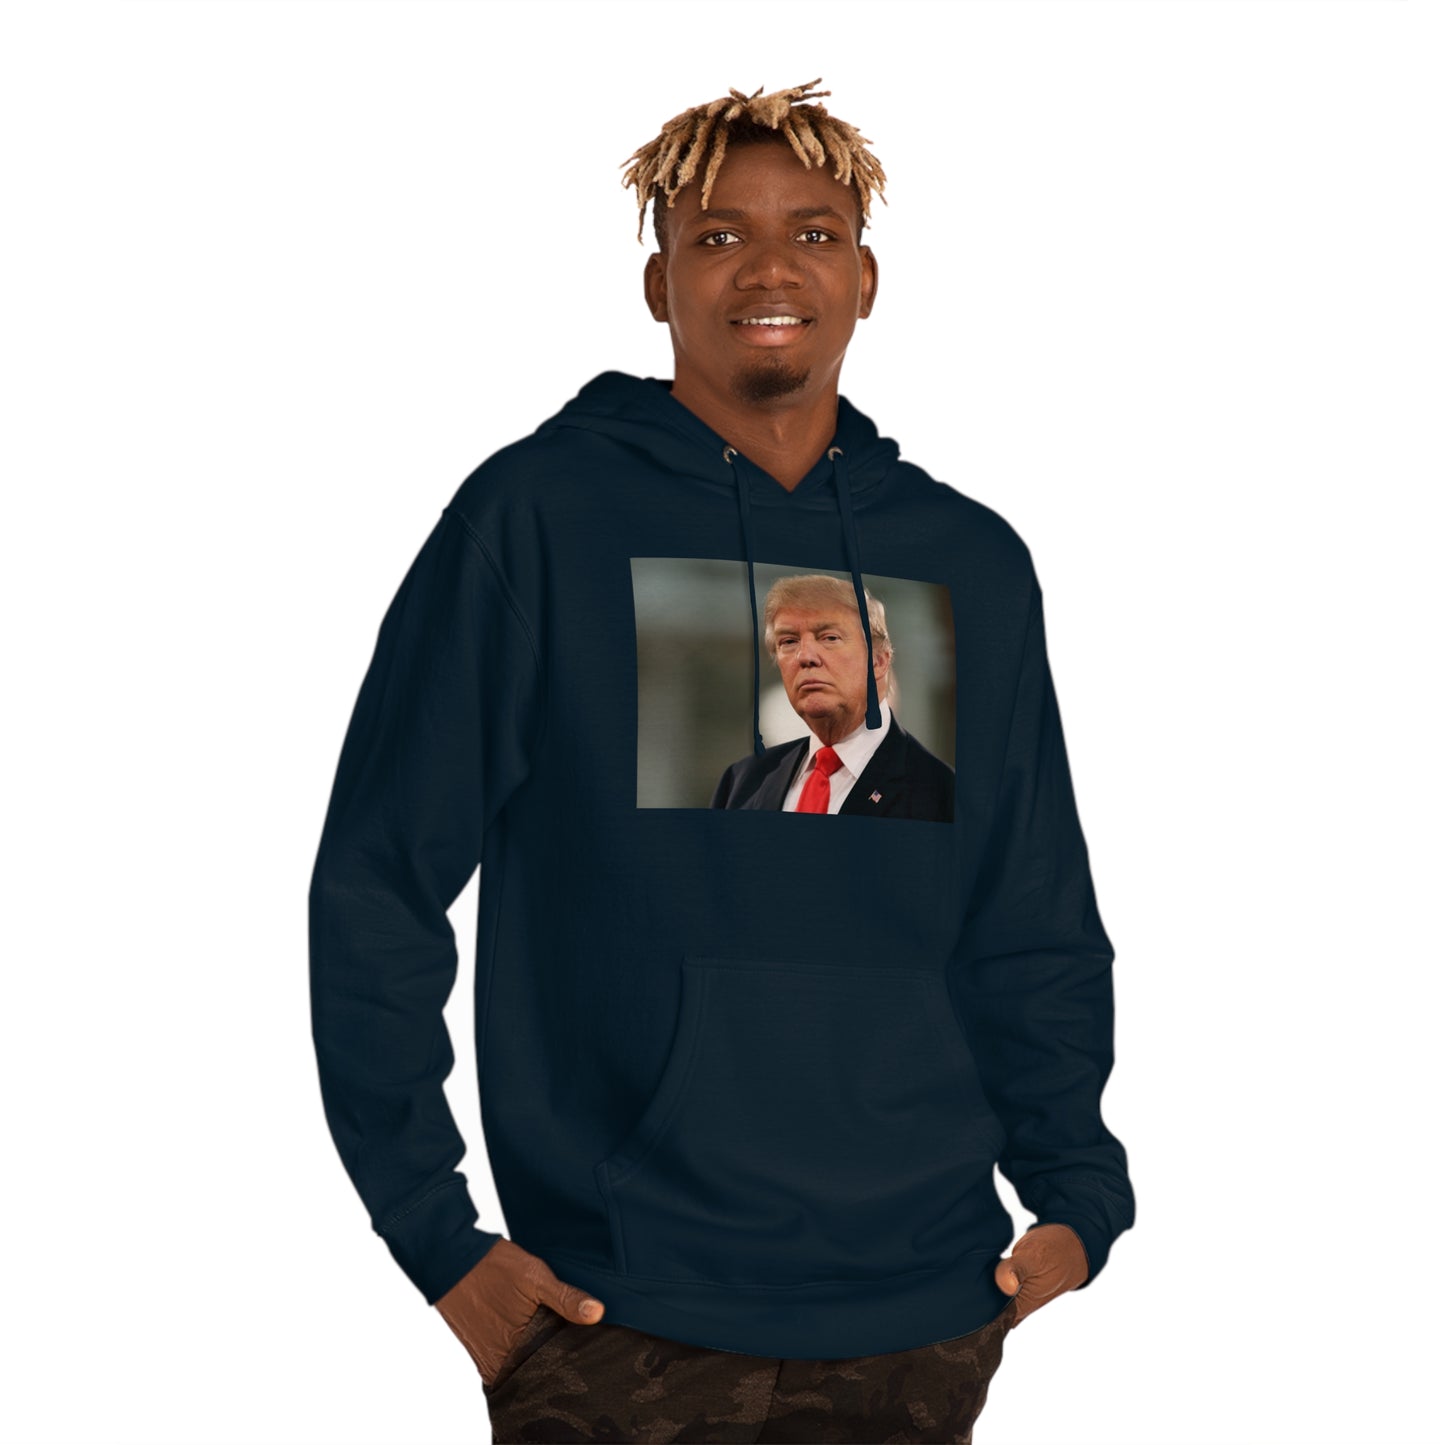 Trump Portrait 2024 soft and durable Unisex Hooded Sweatshirt Choose color and size